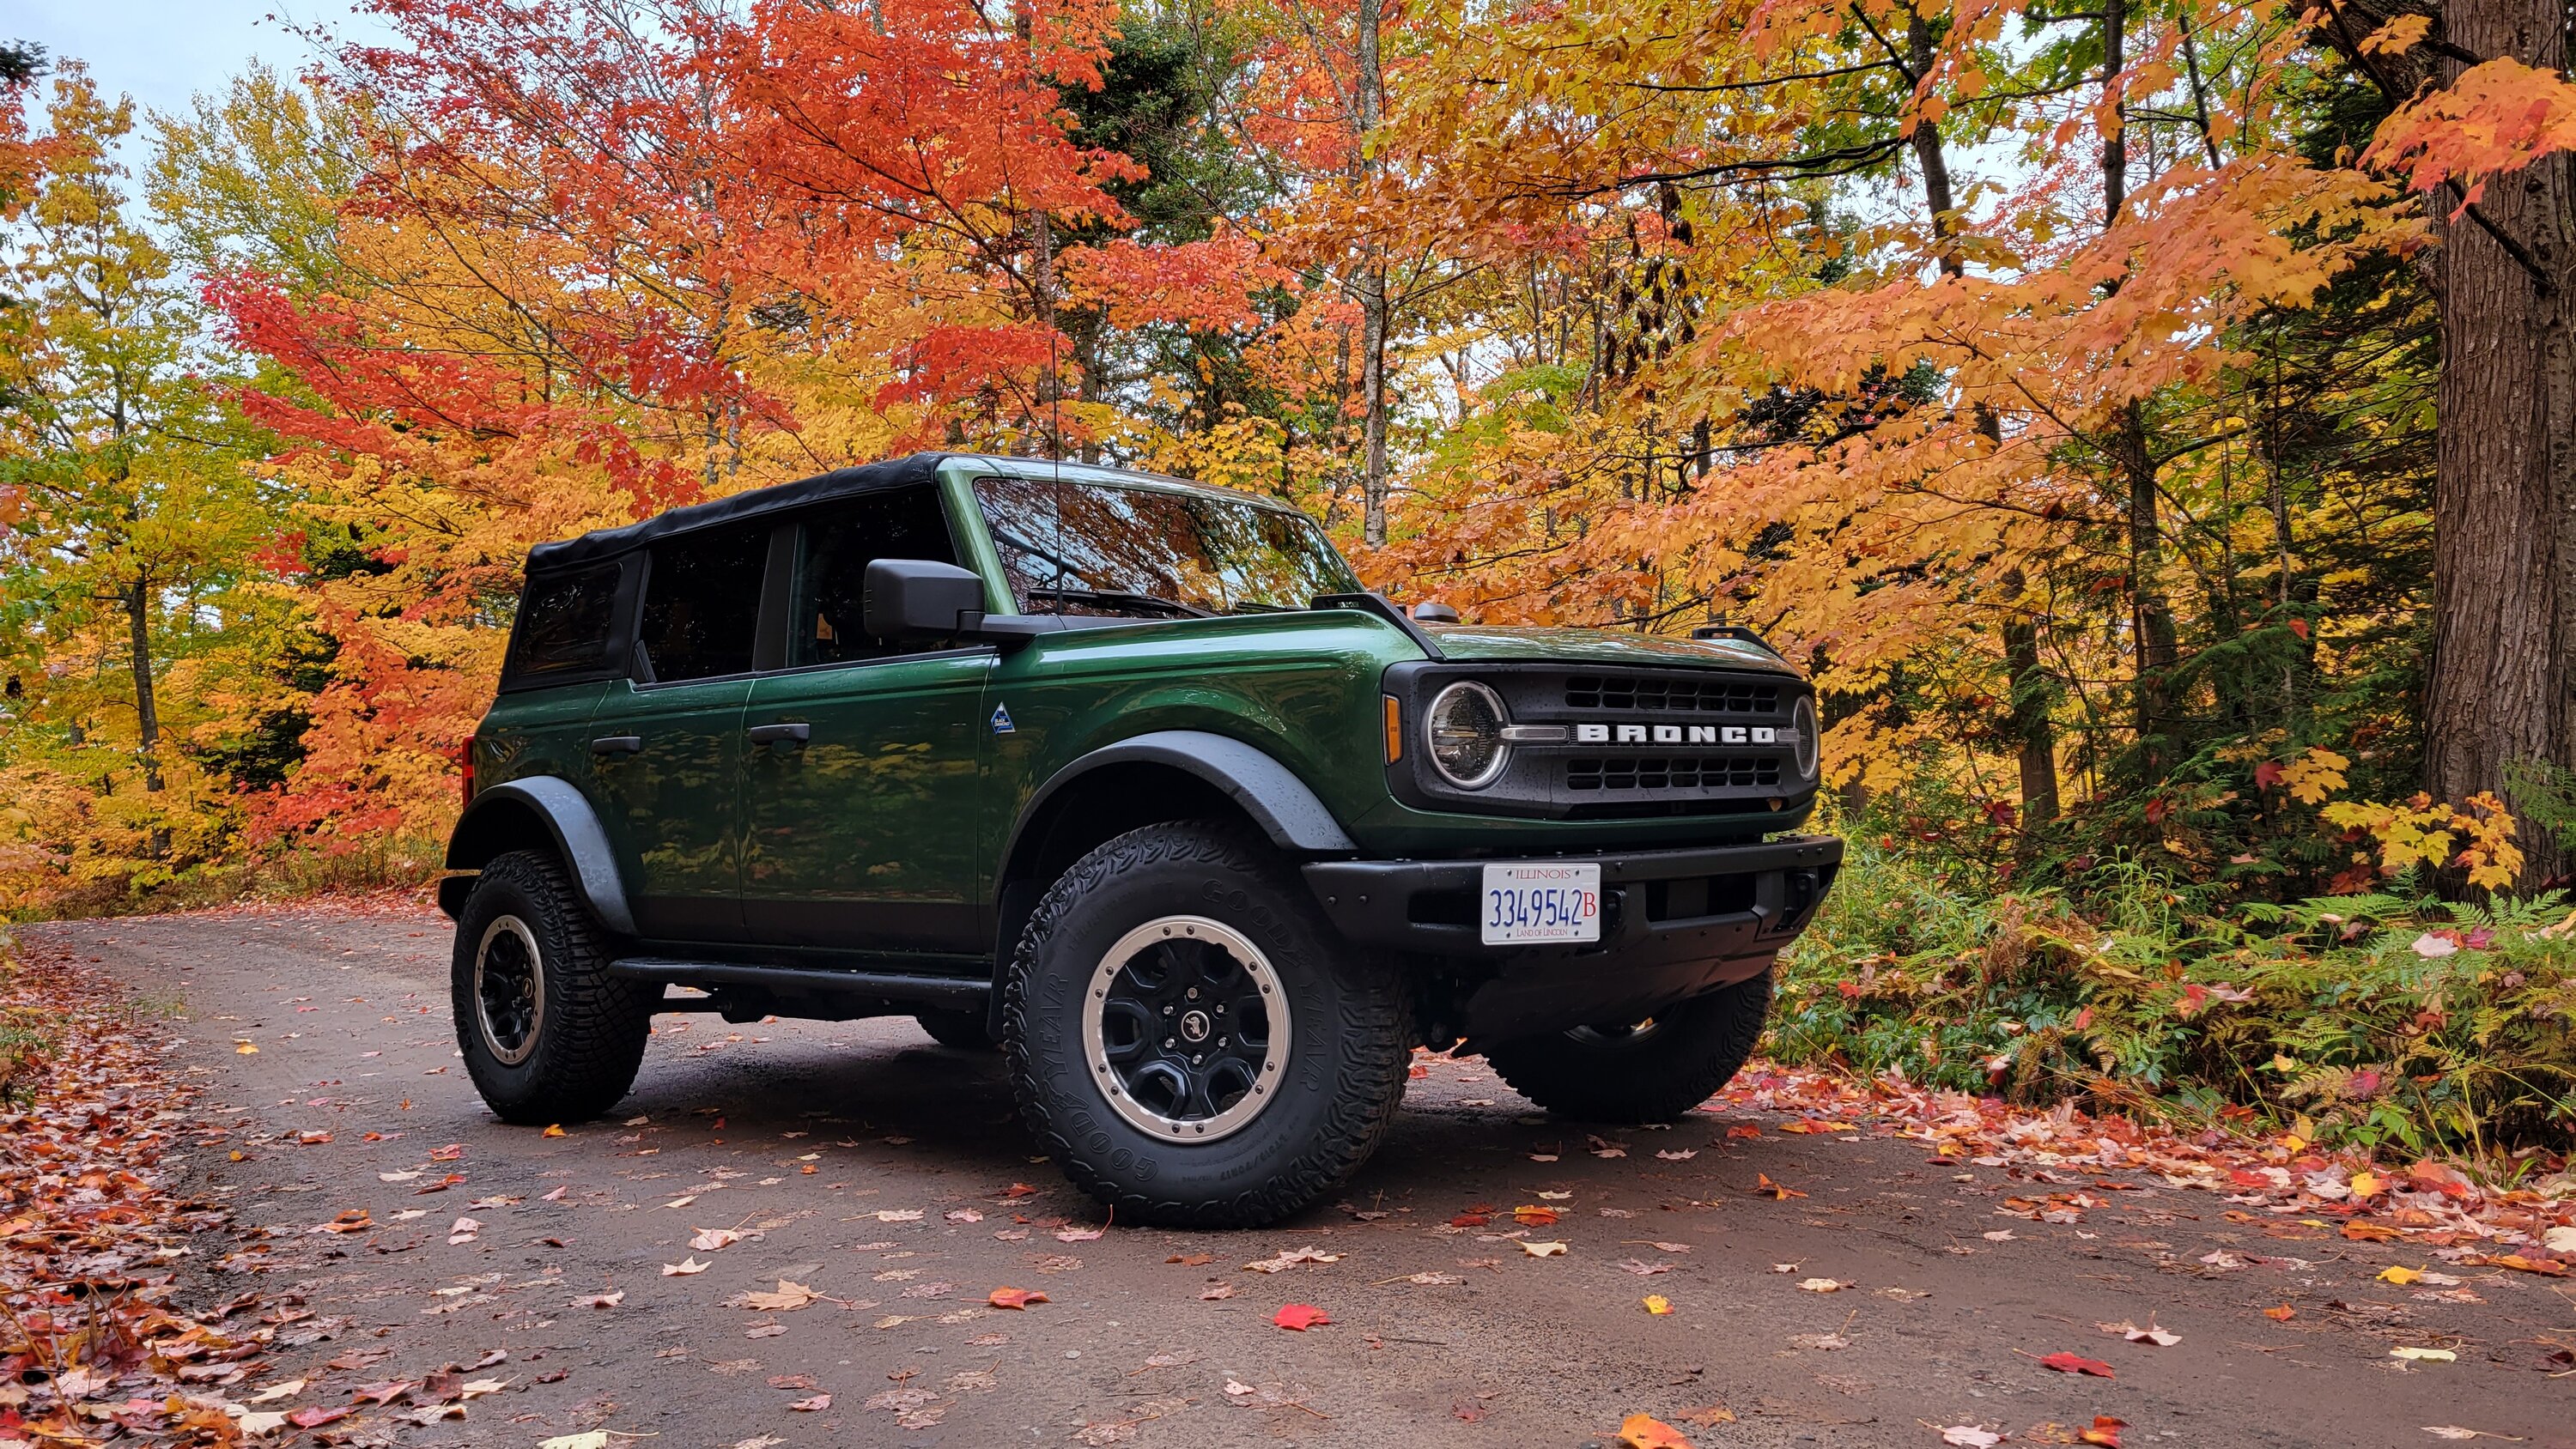 Ford Bronco The Fall of the Keweenaw: Michigan's Upper Peninsula in October trip with Bronco Black Diamond 52430543813_2f110fb693_o